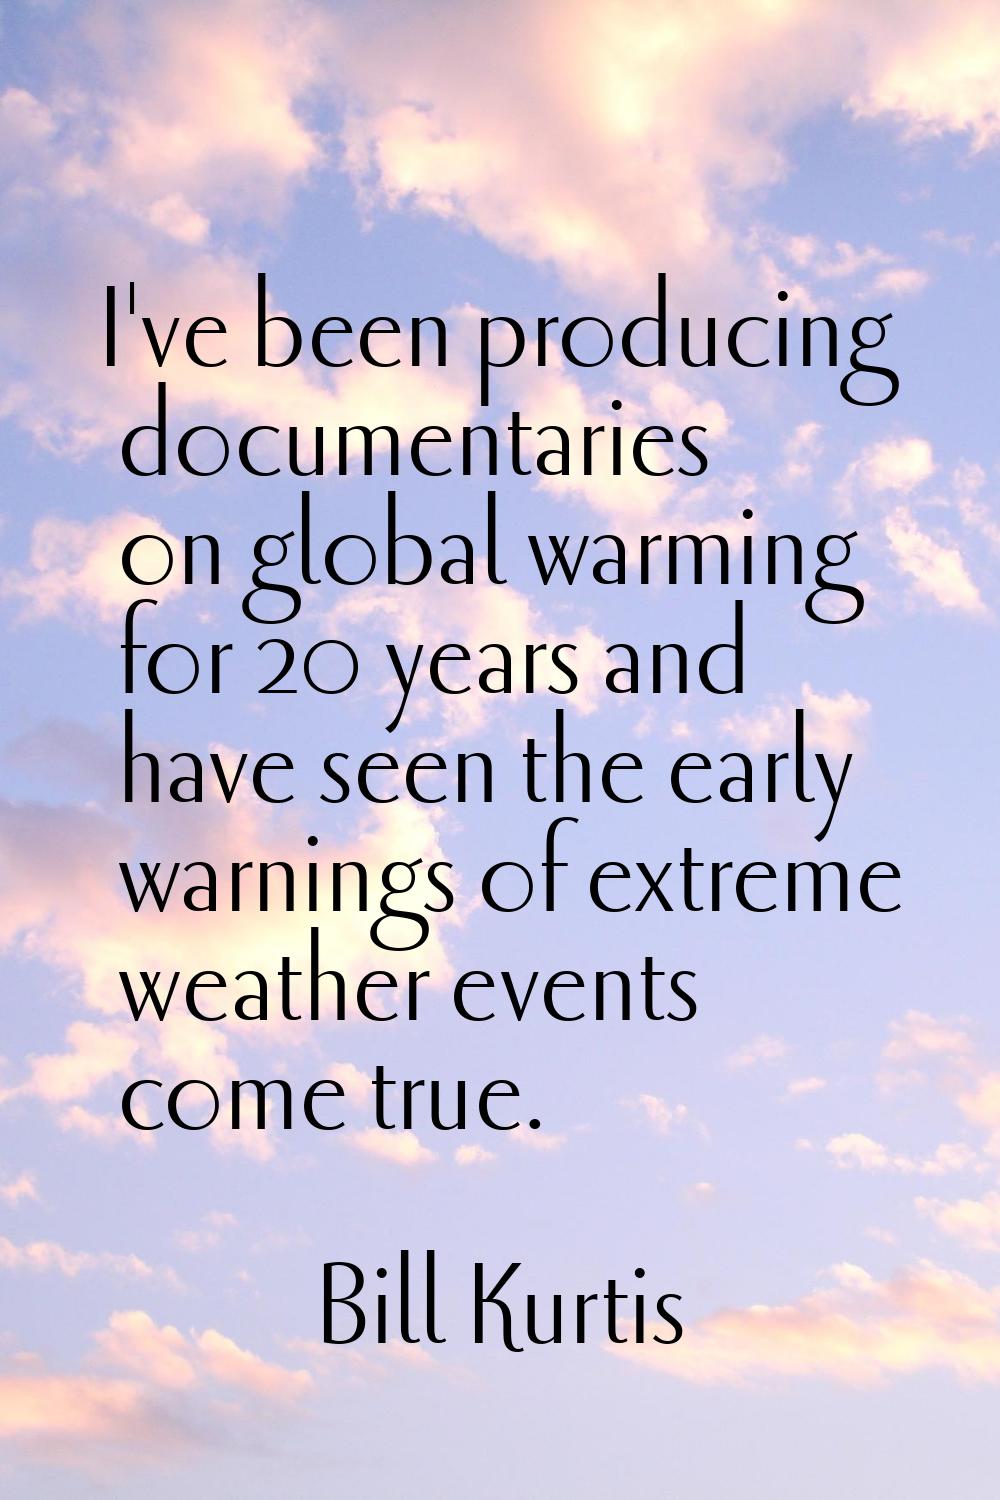 I've been producing documentaries on global warming for 20 years and have seen the early warnings o